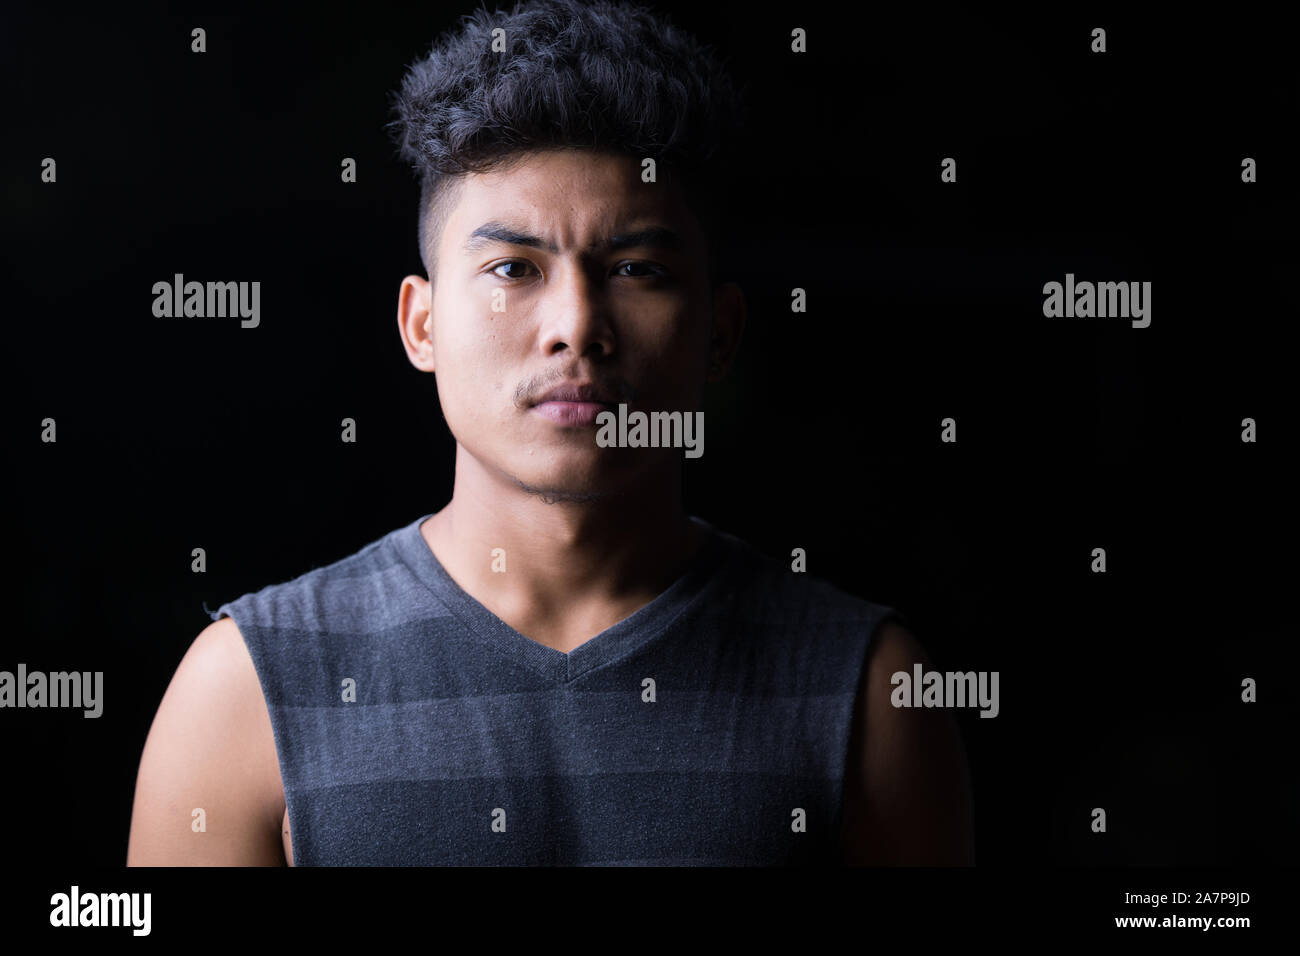 Face of young Asian man at night outdoors Stock Photo